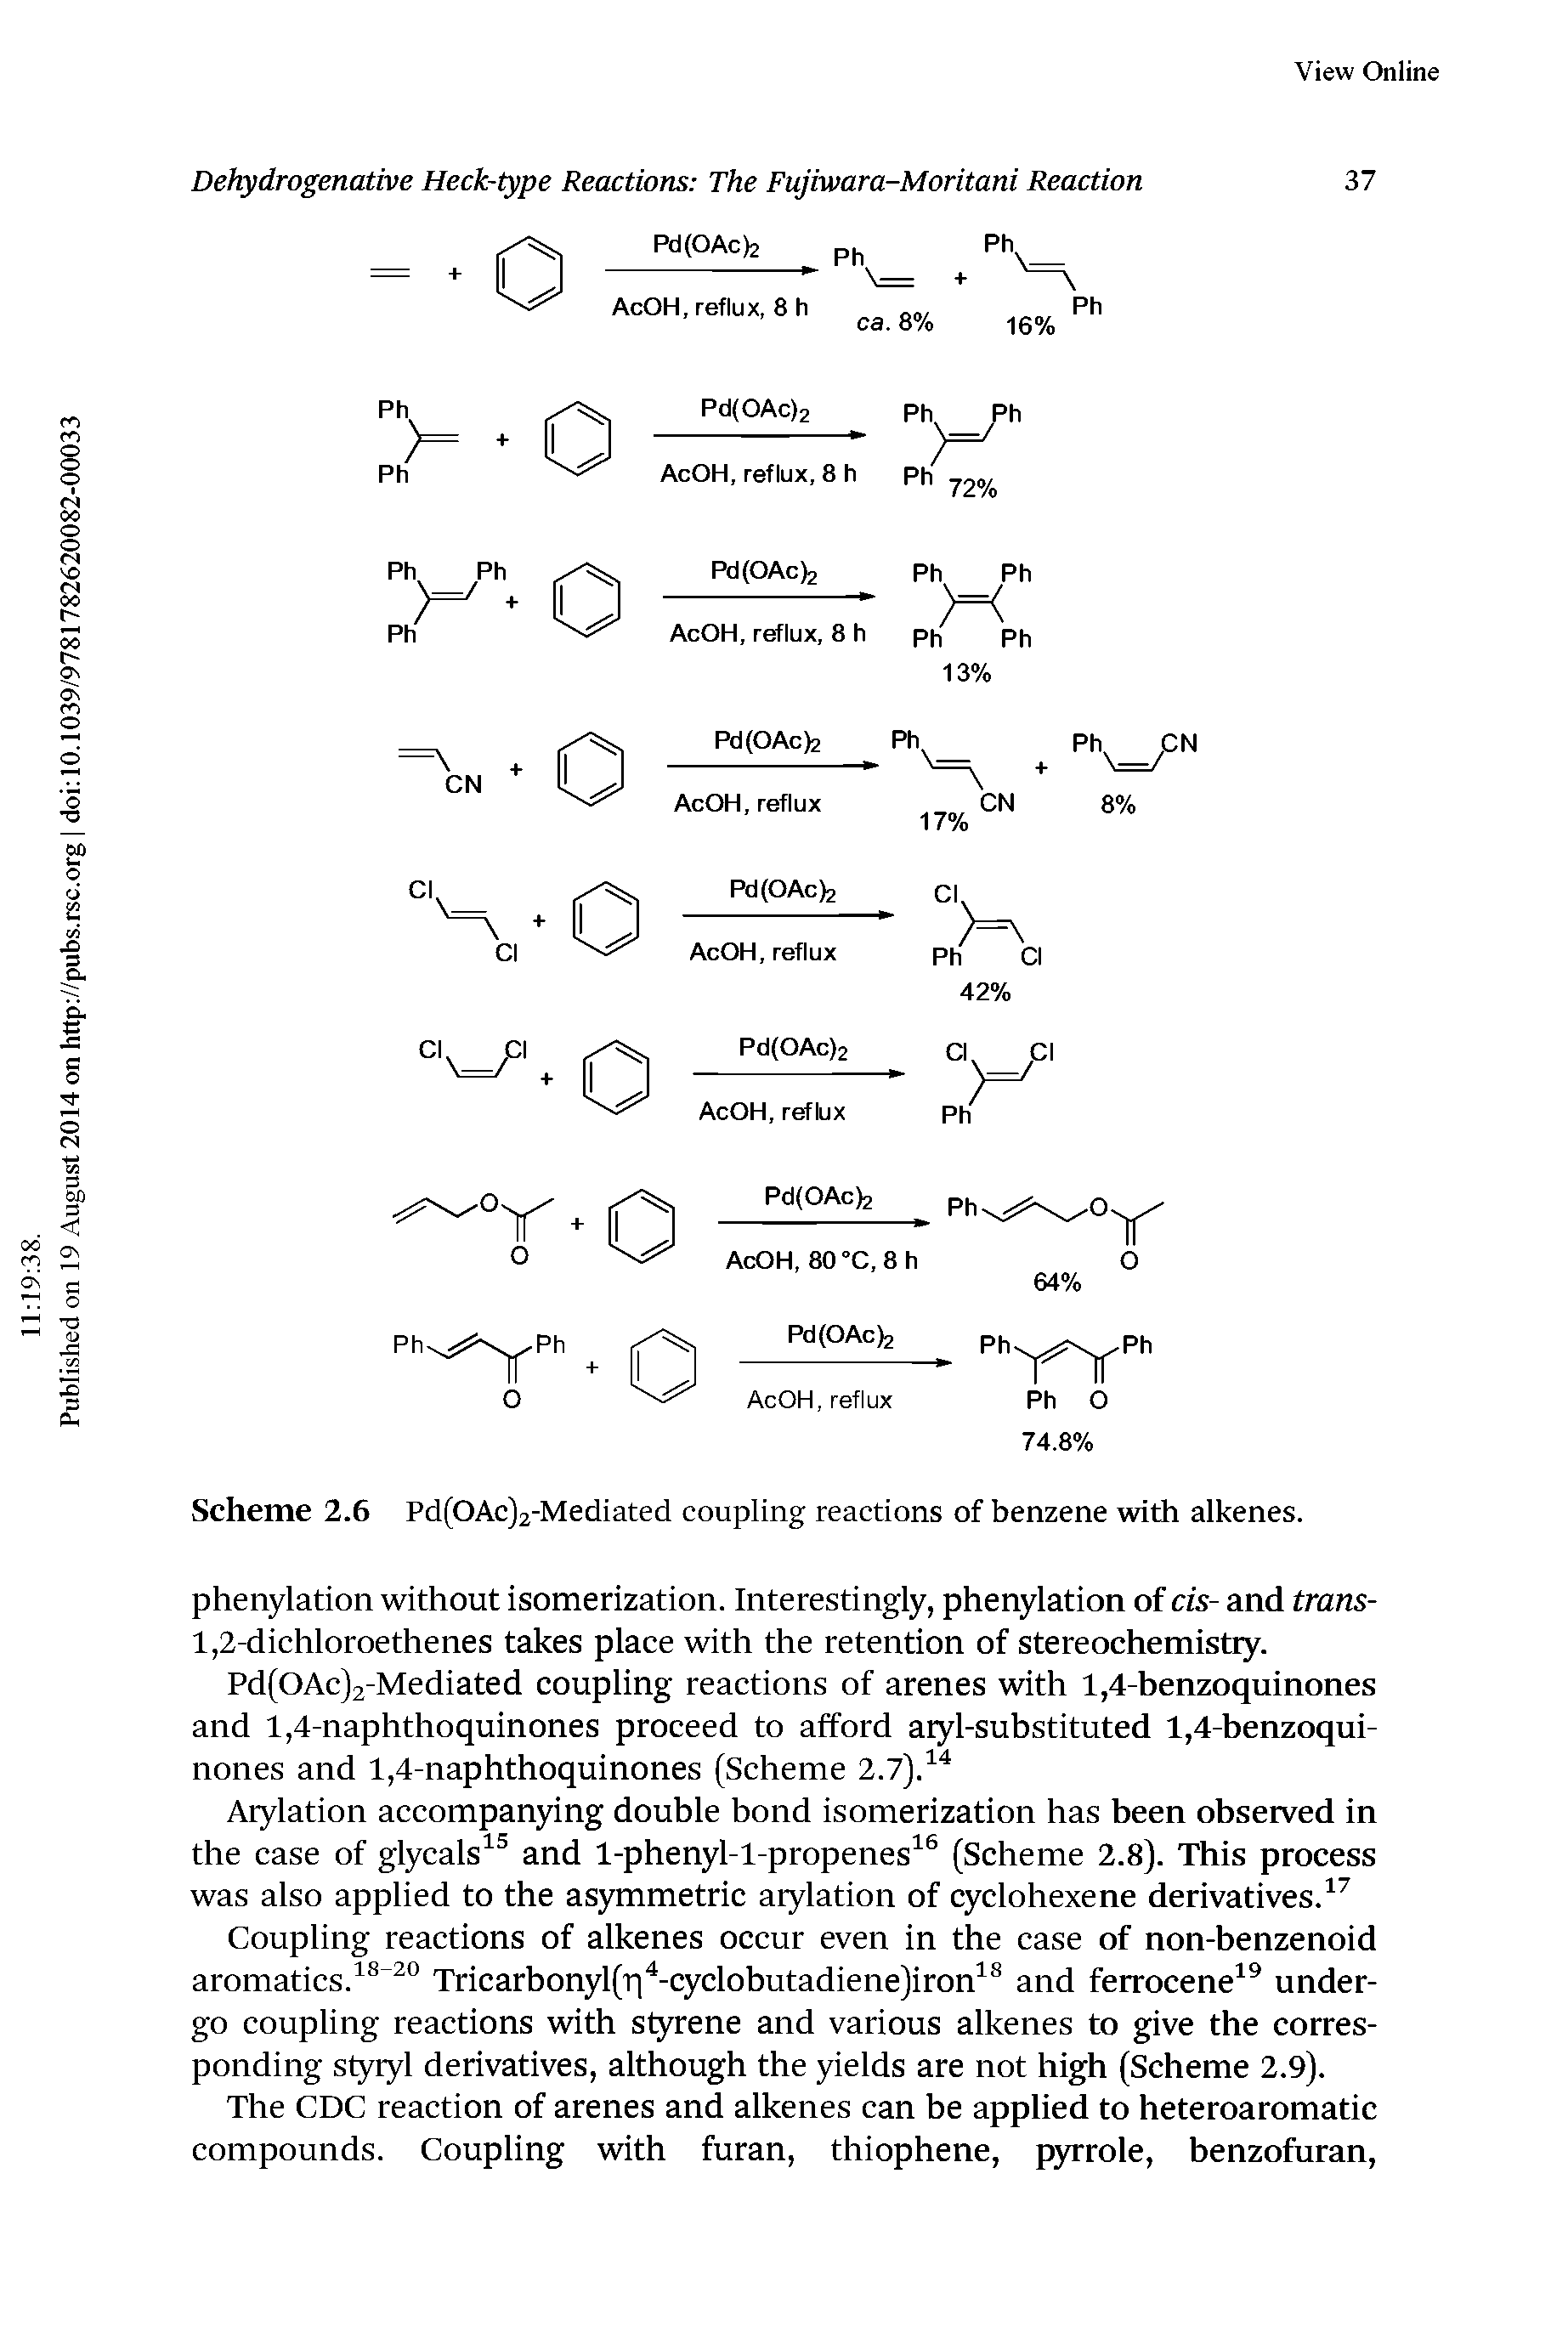 Scheme 2.6 Pd(OAc)2-Mediated coupling reactions of benzene with alkenes.